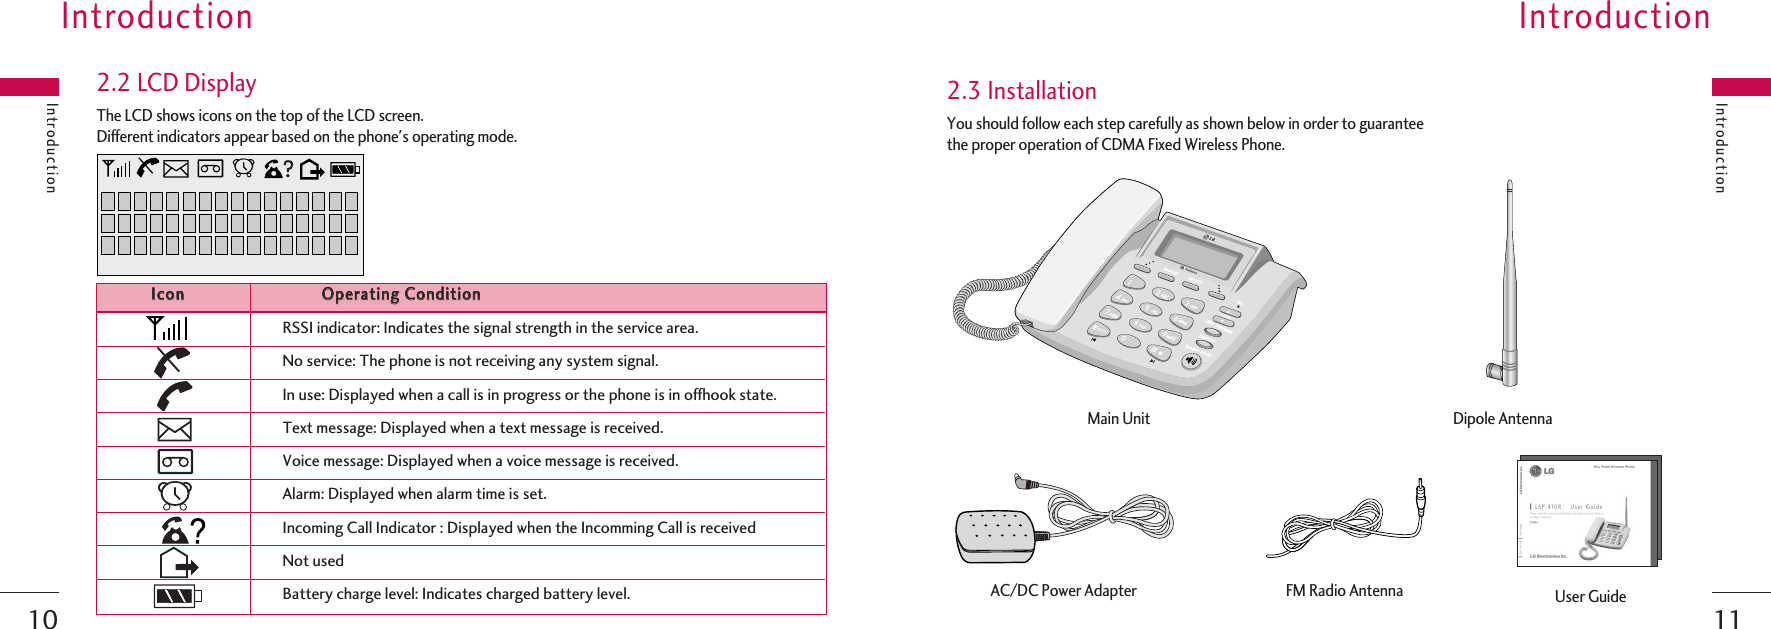 1110IntroductionYou should follow each step carefully as shown below in order to guaranteethe proper operation of CDMA Fixed Wireless Phone.2.3 InstallationMessageEND/PWRMicDial/FlashSpeaker phoneMessageEND/PWRMicVolumeClearDial/FlashSpeaker phone/ FM RadioAC/DC Power Adapter FM Radio AntennaMain UnitUser GuideDipole AntennaIntroductionThe LCD shows icons on the top of the LCD screen.Different indicators appear based on the phone&apos;s operating mode.2.2 LCD DisplayIntroductionIIccoonnOOppeerraattiinngg  CCoonnddiittiioonnRSSI indicator: Indicates the signal strength in the service area.No service: The phone is not receiving any system signal.In use: Displayed when a call is in progress or the phone is in offhook state.Text message: Displayed when a text message is received.Voice message: Displayed when a voice message is received.Alarm: Displayed when alarm time is set.Incoming Call Indicator : Displayed when the Incomming Call is receivedNot usedBattery charge level: Indicates charged battery level.Introduction